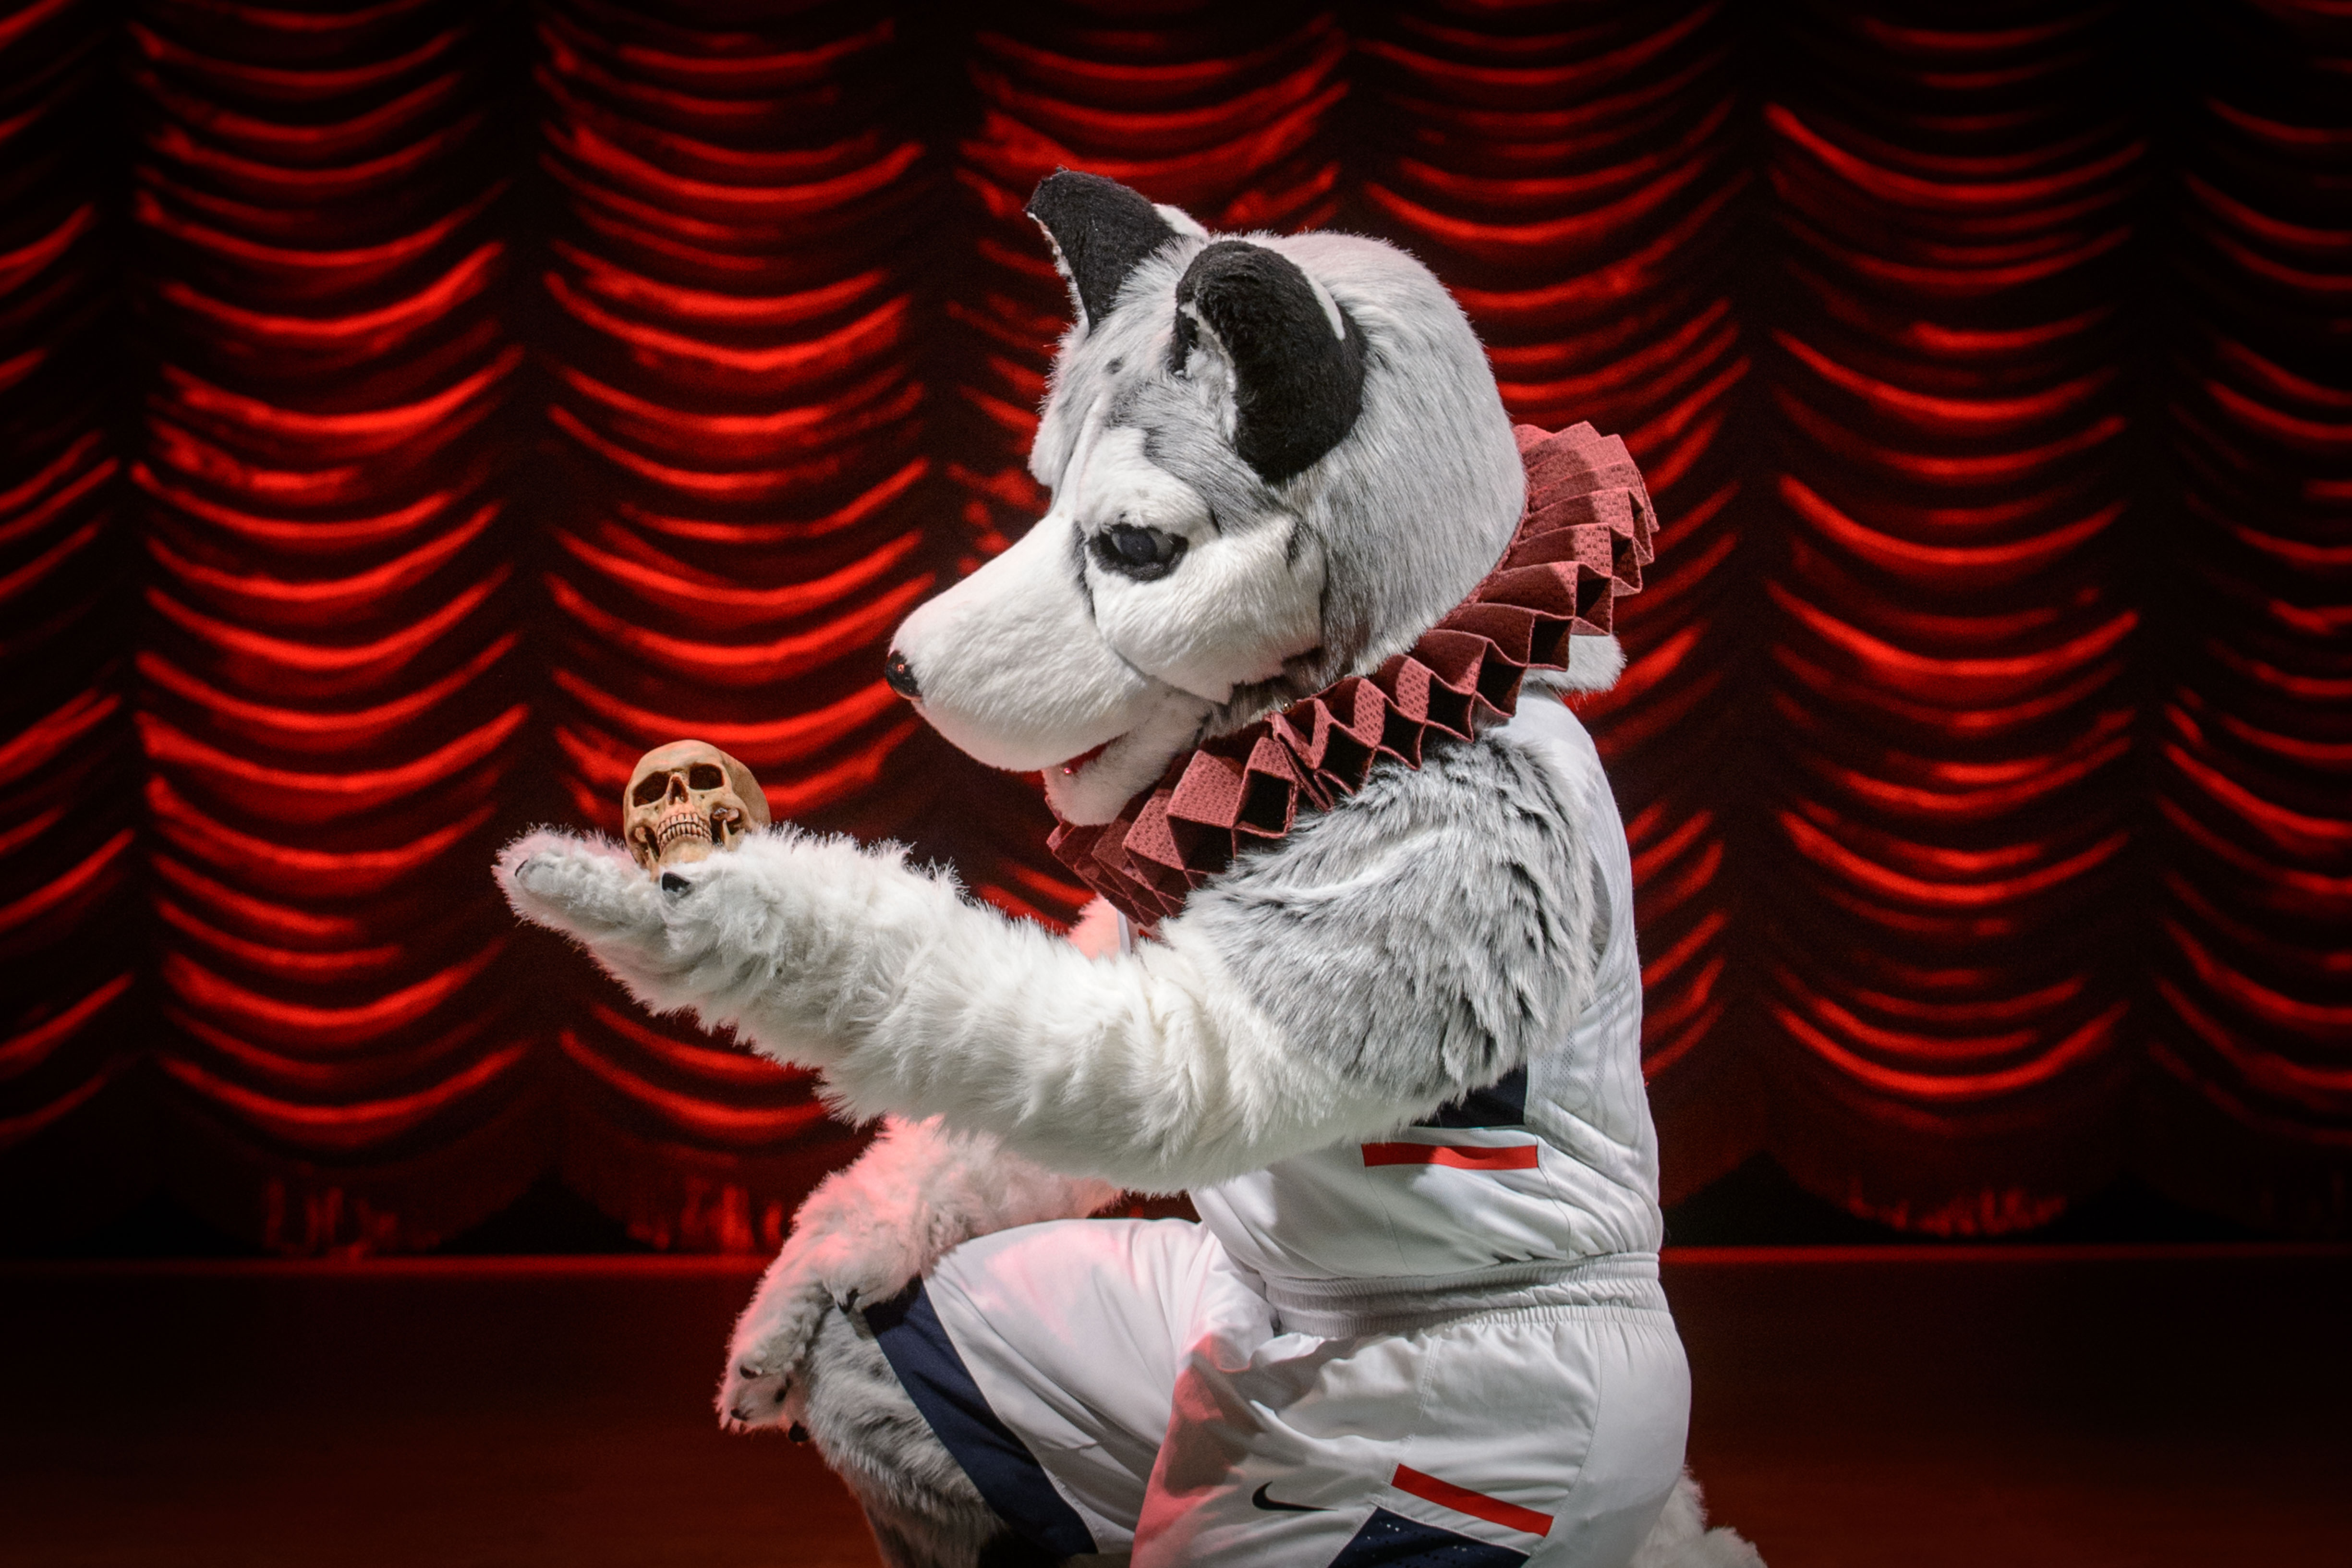 Jonathan the Husky poses wearing an Elizabethan collar on stage at the Harriet S. Jorgensen Theatre. (Peter Morenus/UConn Photo)